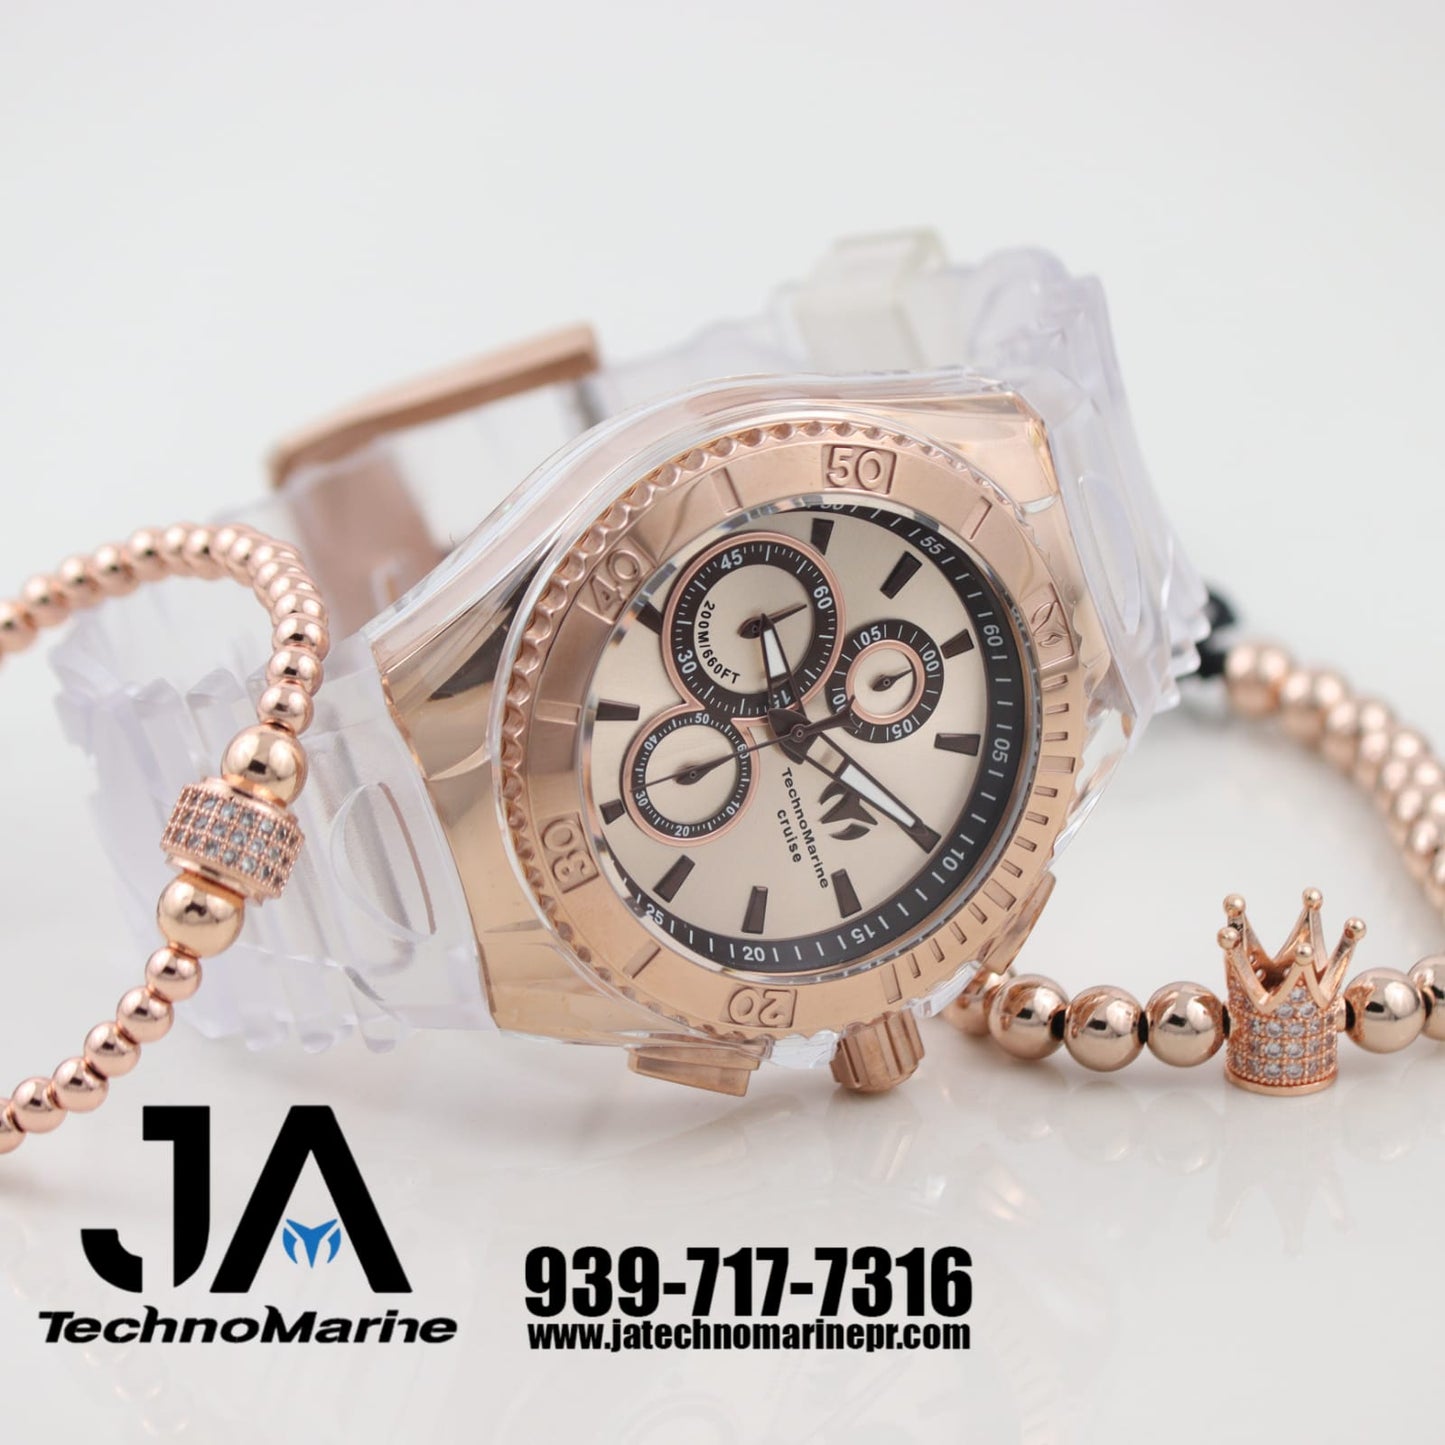 Technomarine Cruise Strap Clear Star 45mm Watch With Rose Gold Dial 